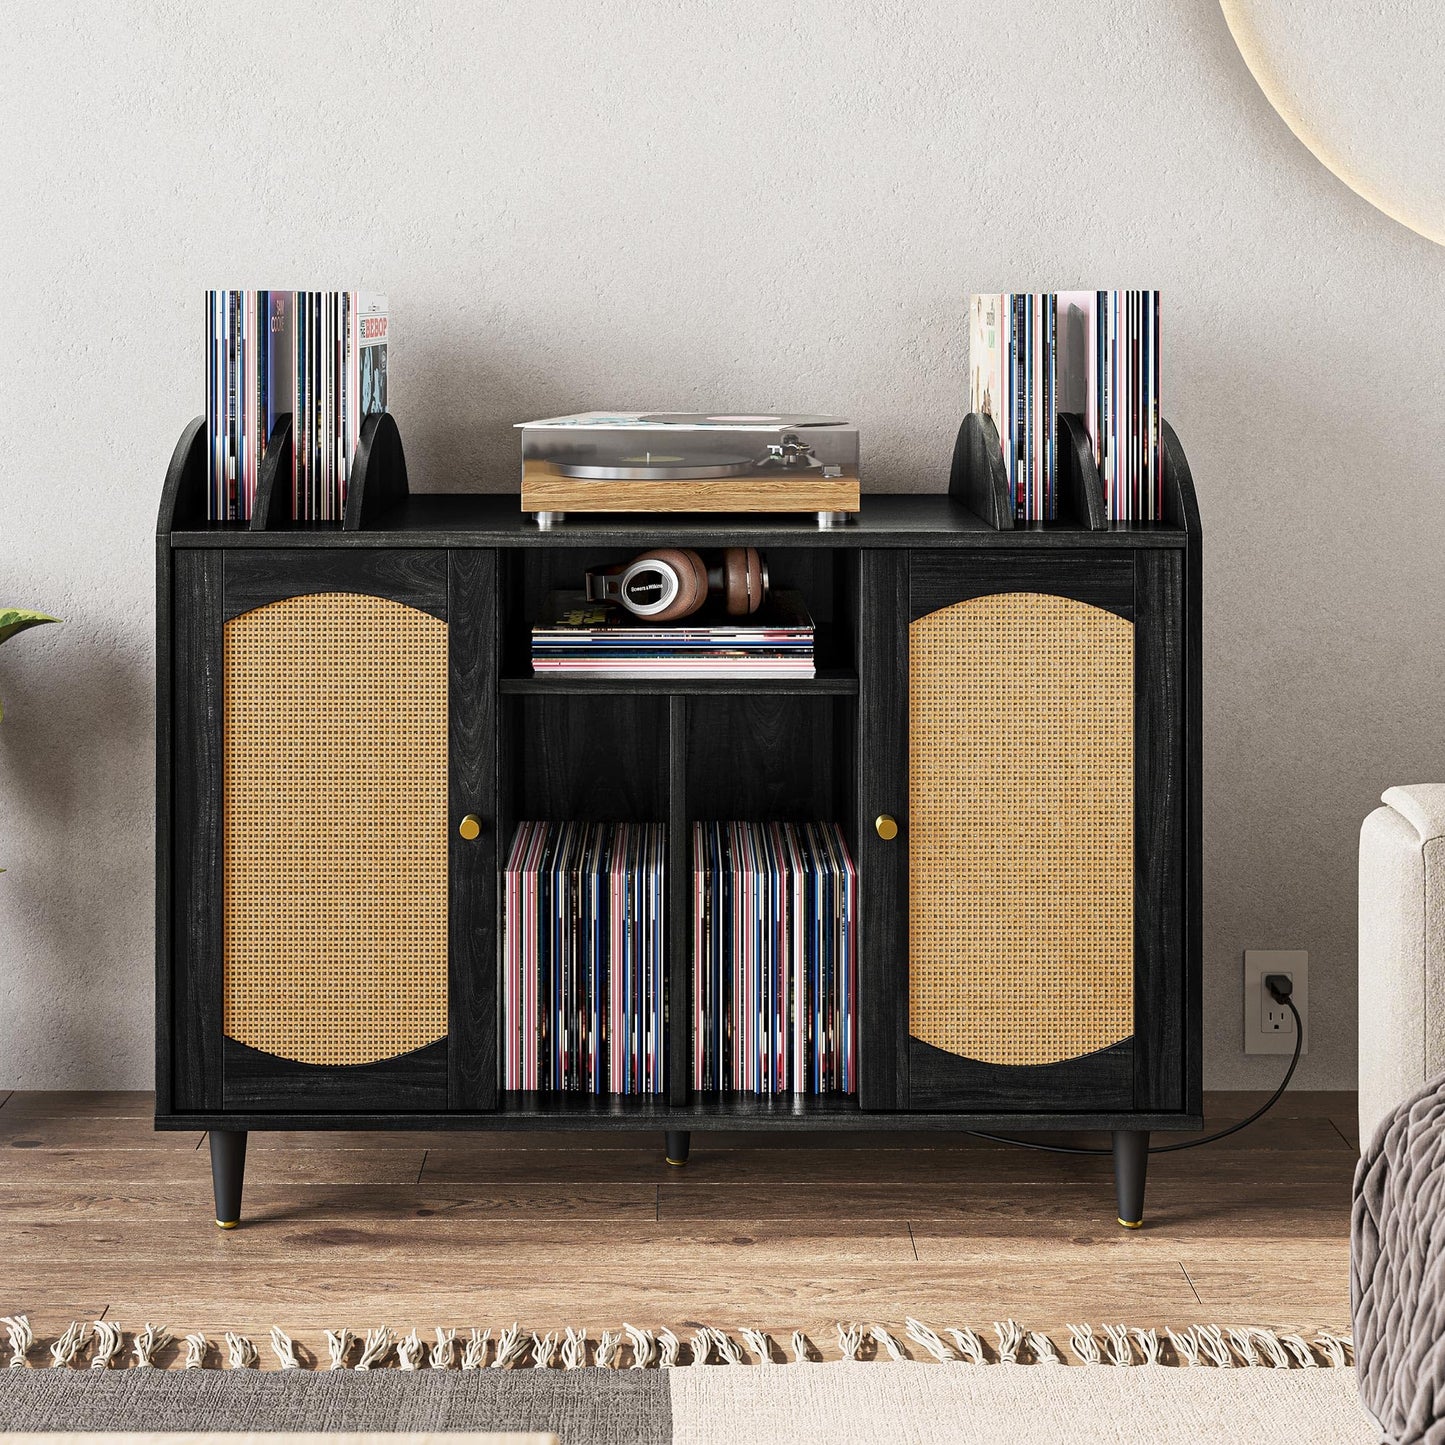 BELLEZE Mid-Century Record Player Stand, Vinyl Record Storage Cabinet Holds up to 350+ Albums, Rattern Decorated Turntable Stand with Power Outlet for Living Room, Bedroom and Office - Brown